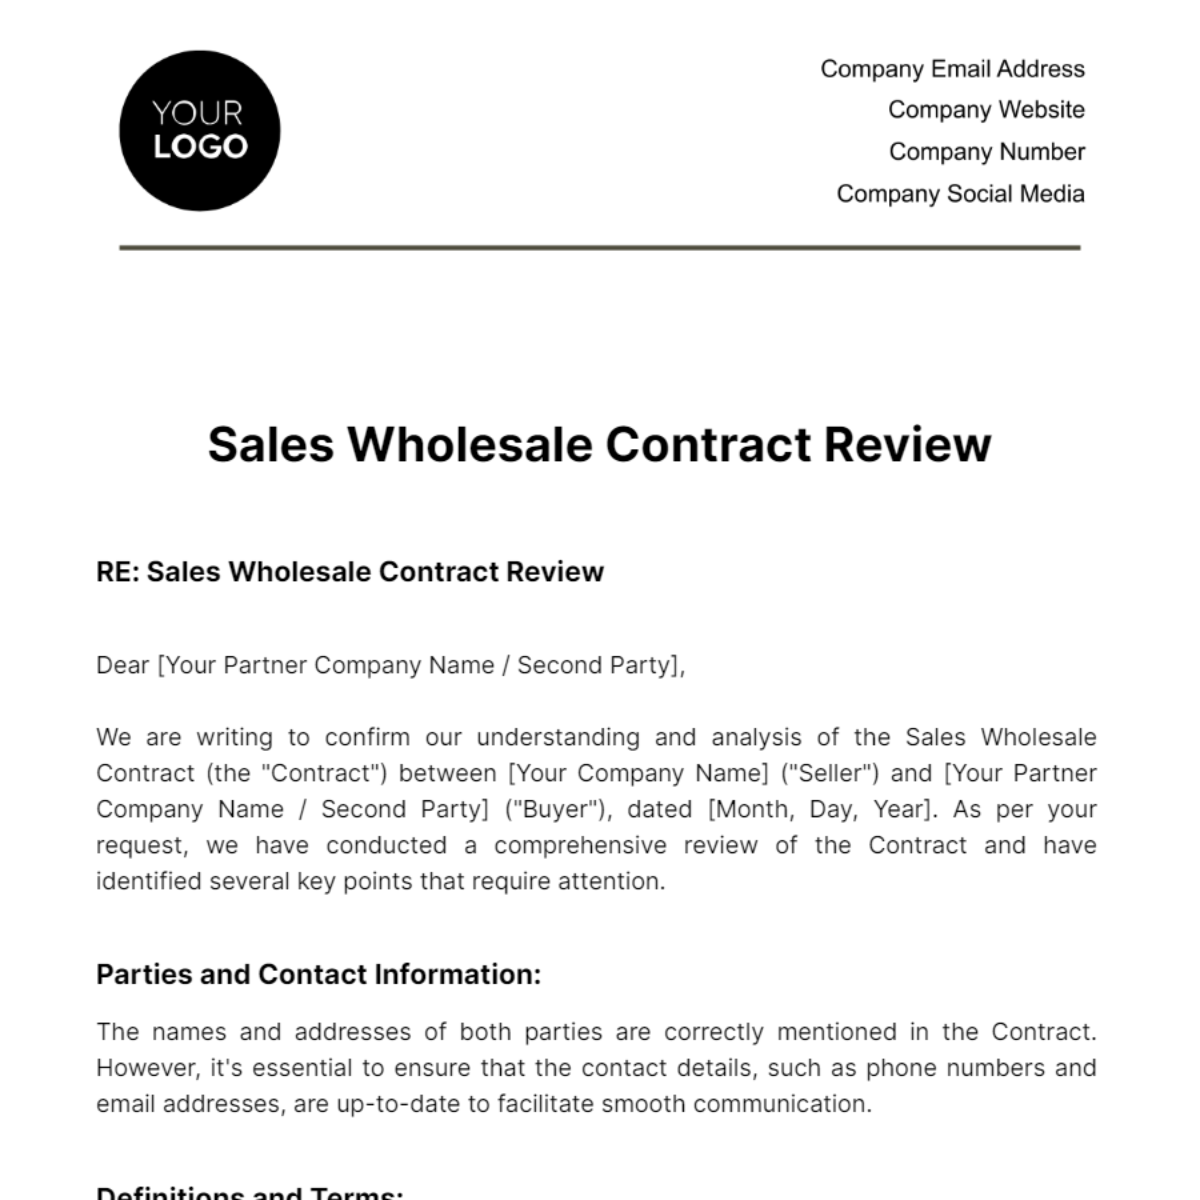 Free Sales Wholesale Contract Review Template